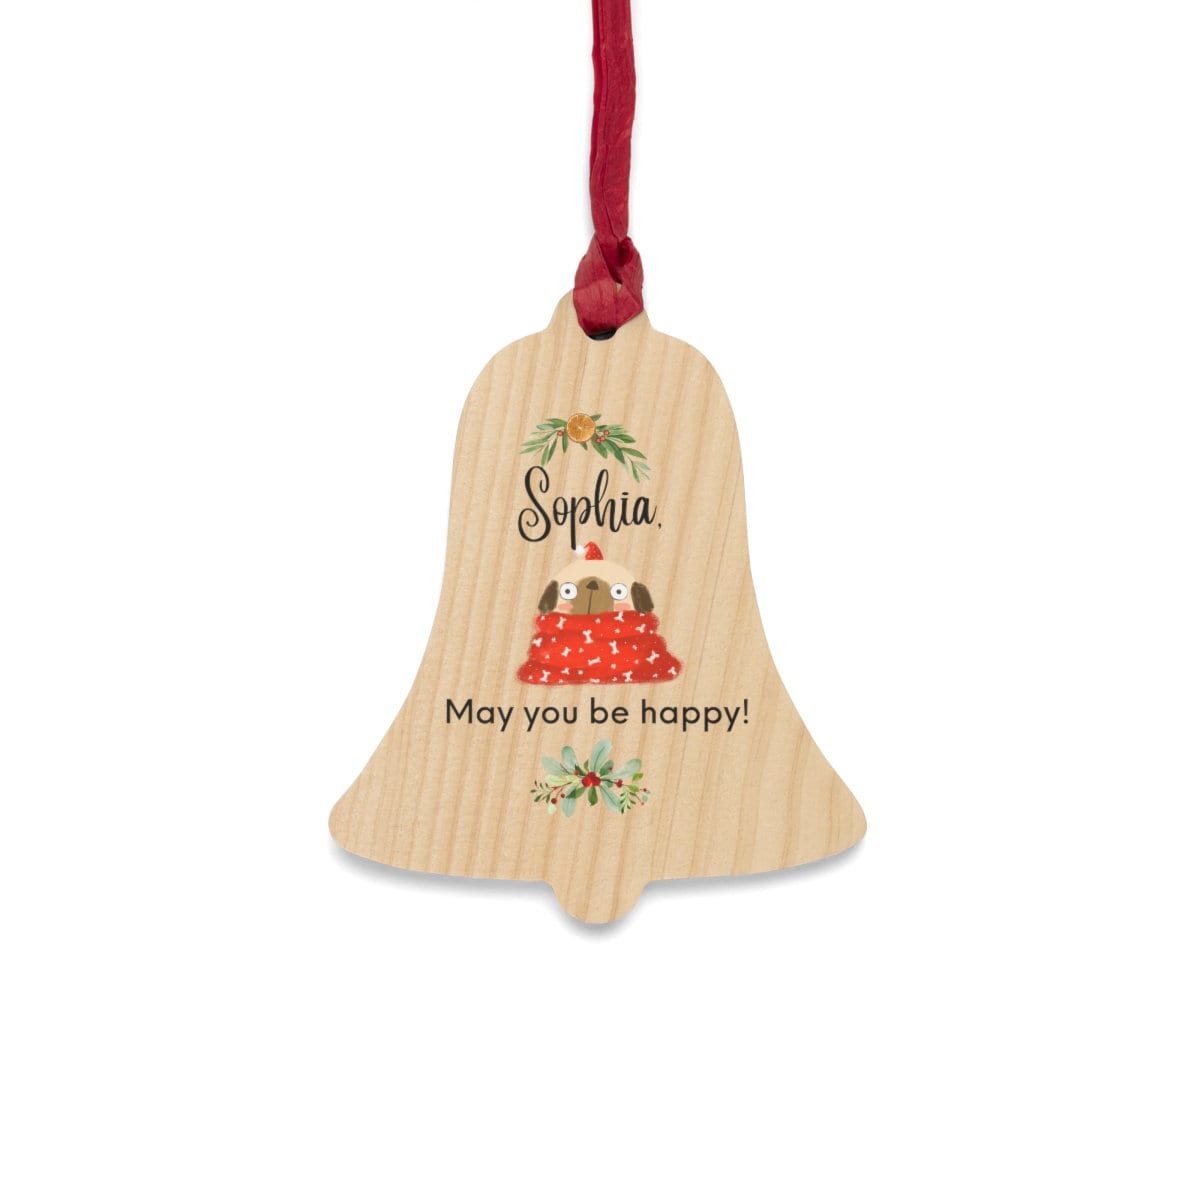 Personalized Wooden Christmas Ornaments, Custom Ornaments, Personalized Thoughtful gift